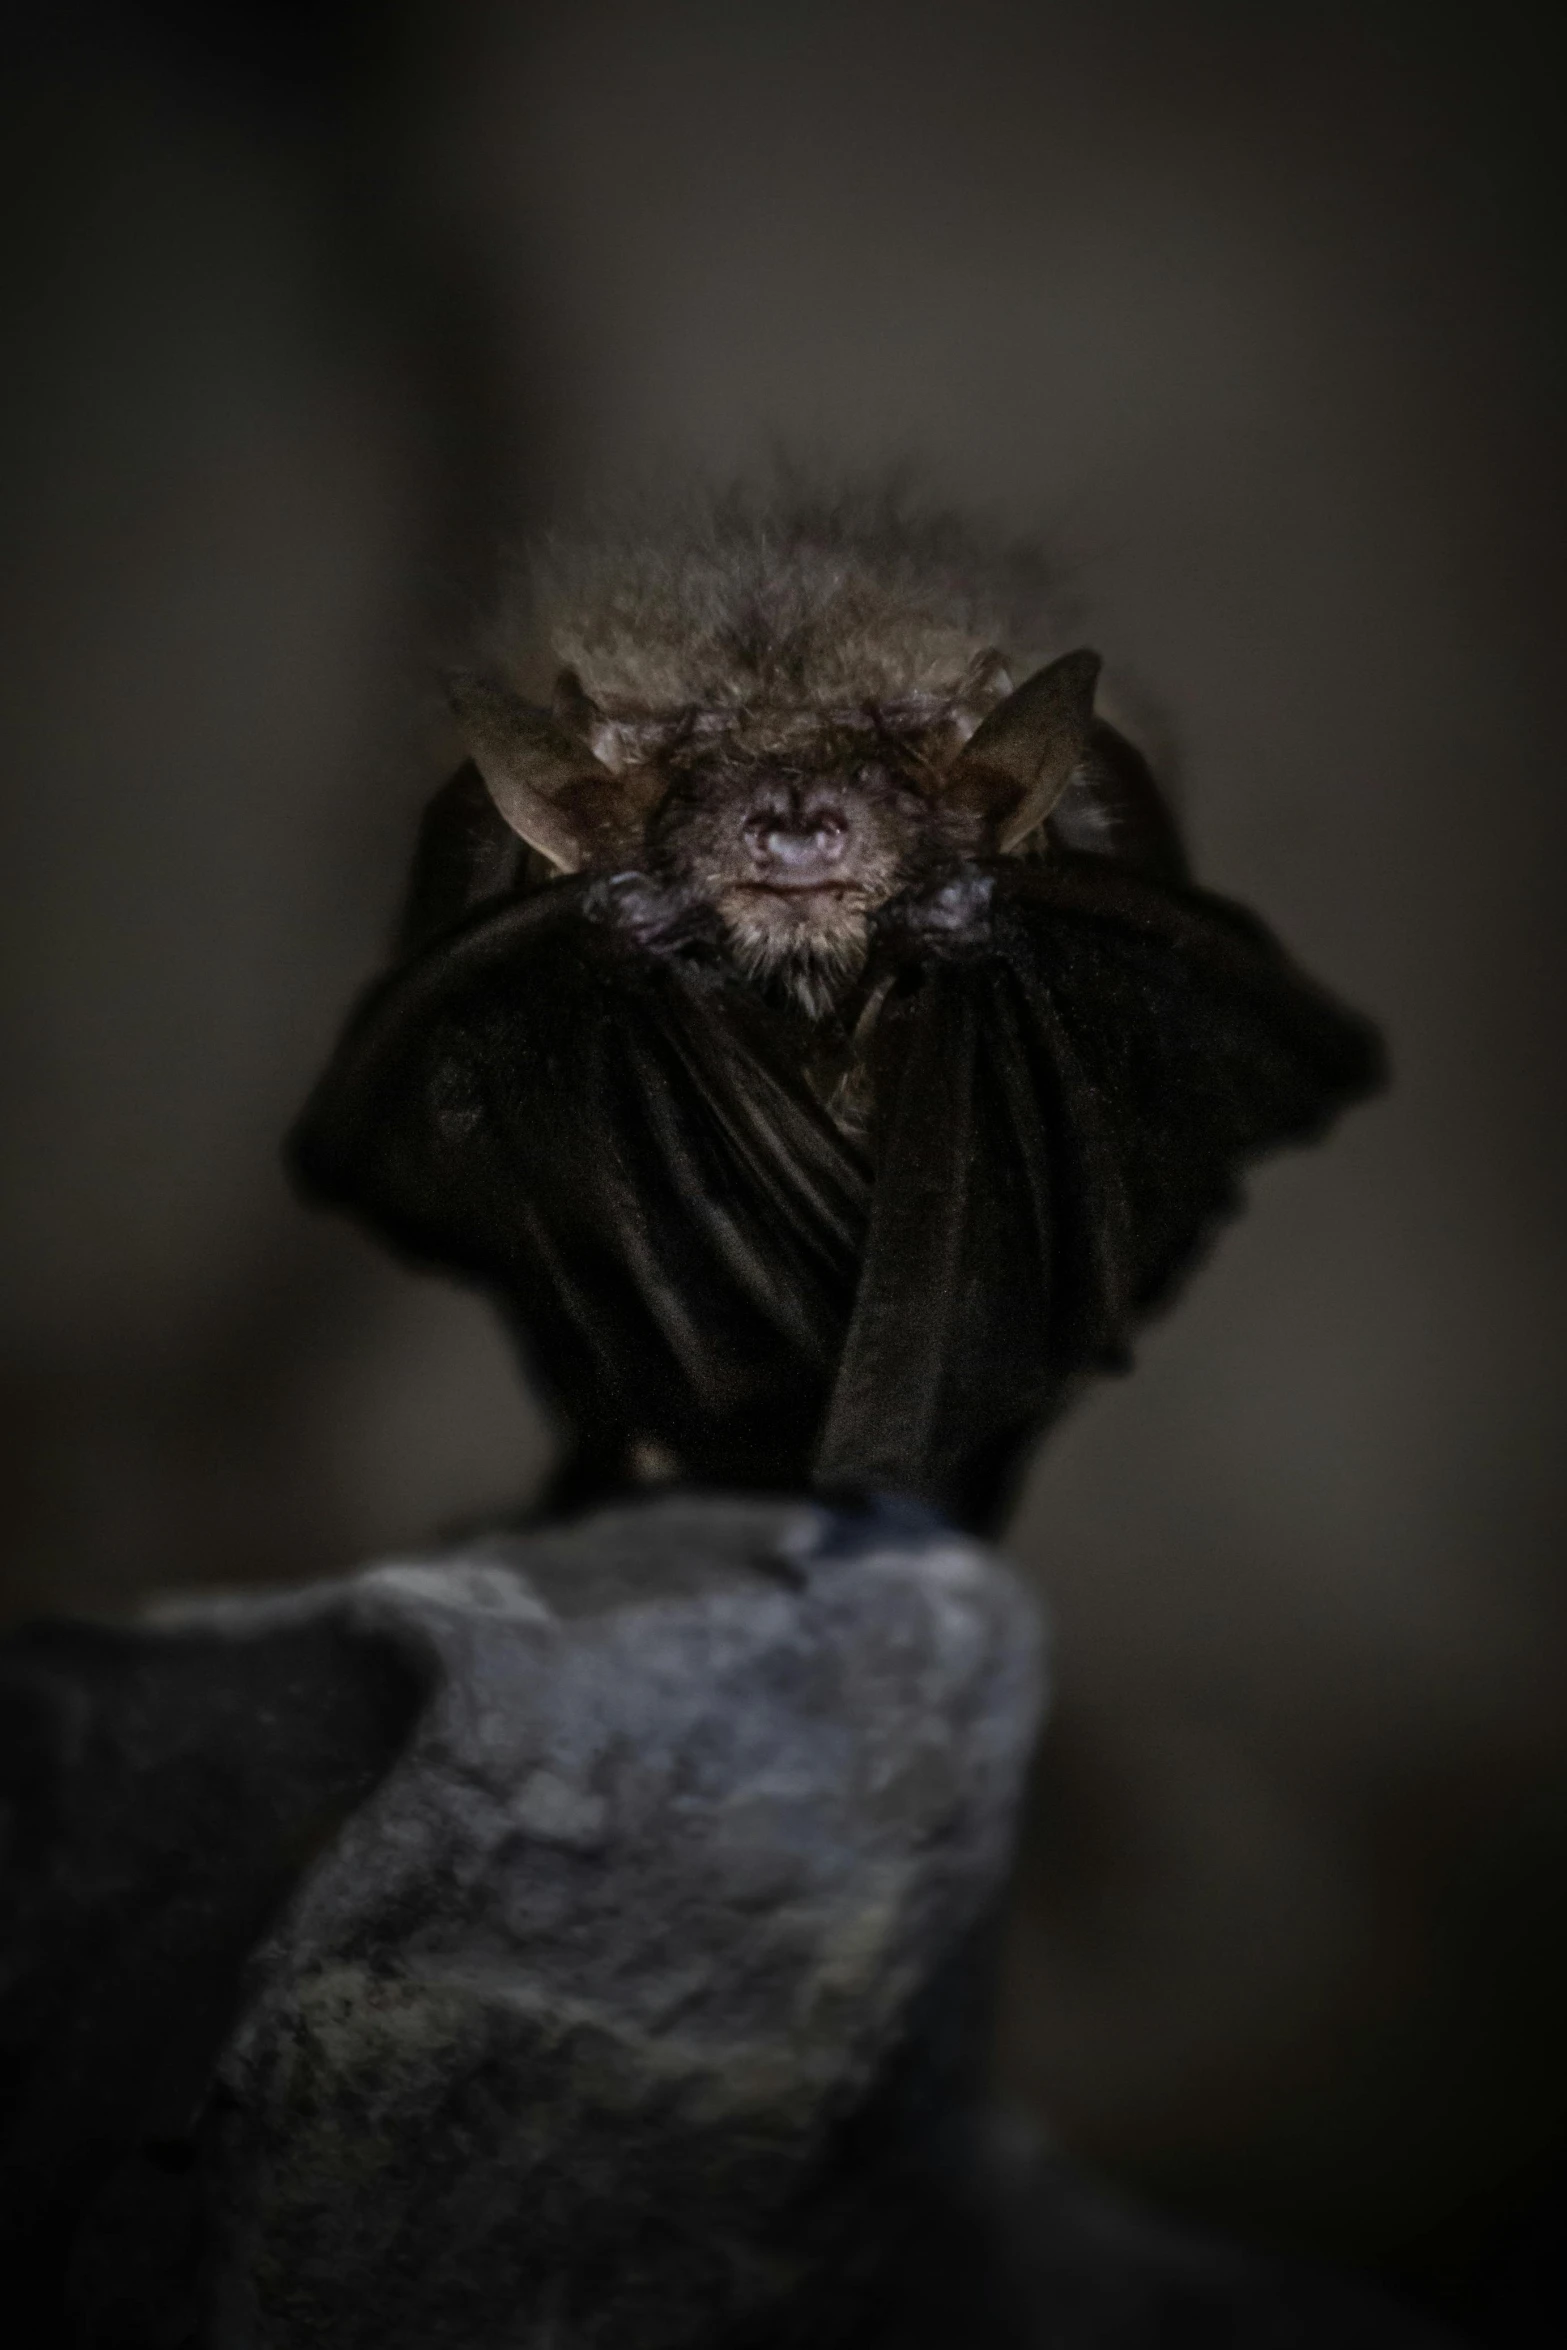 the brown bat is resting on the rock